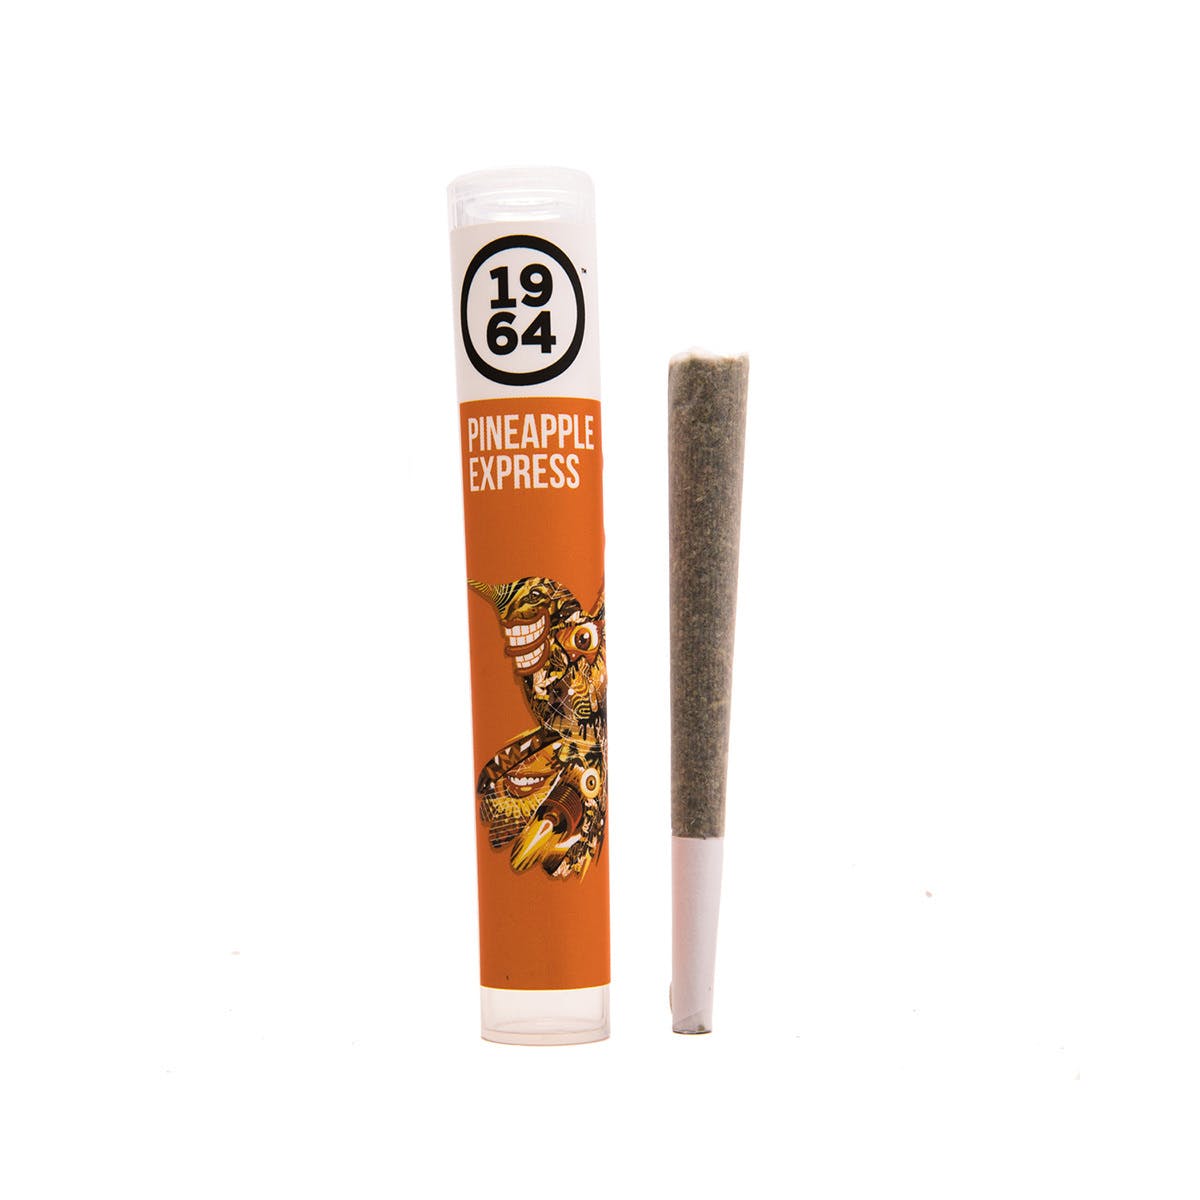 Pineapple Express Pre-Roll